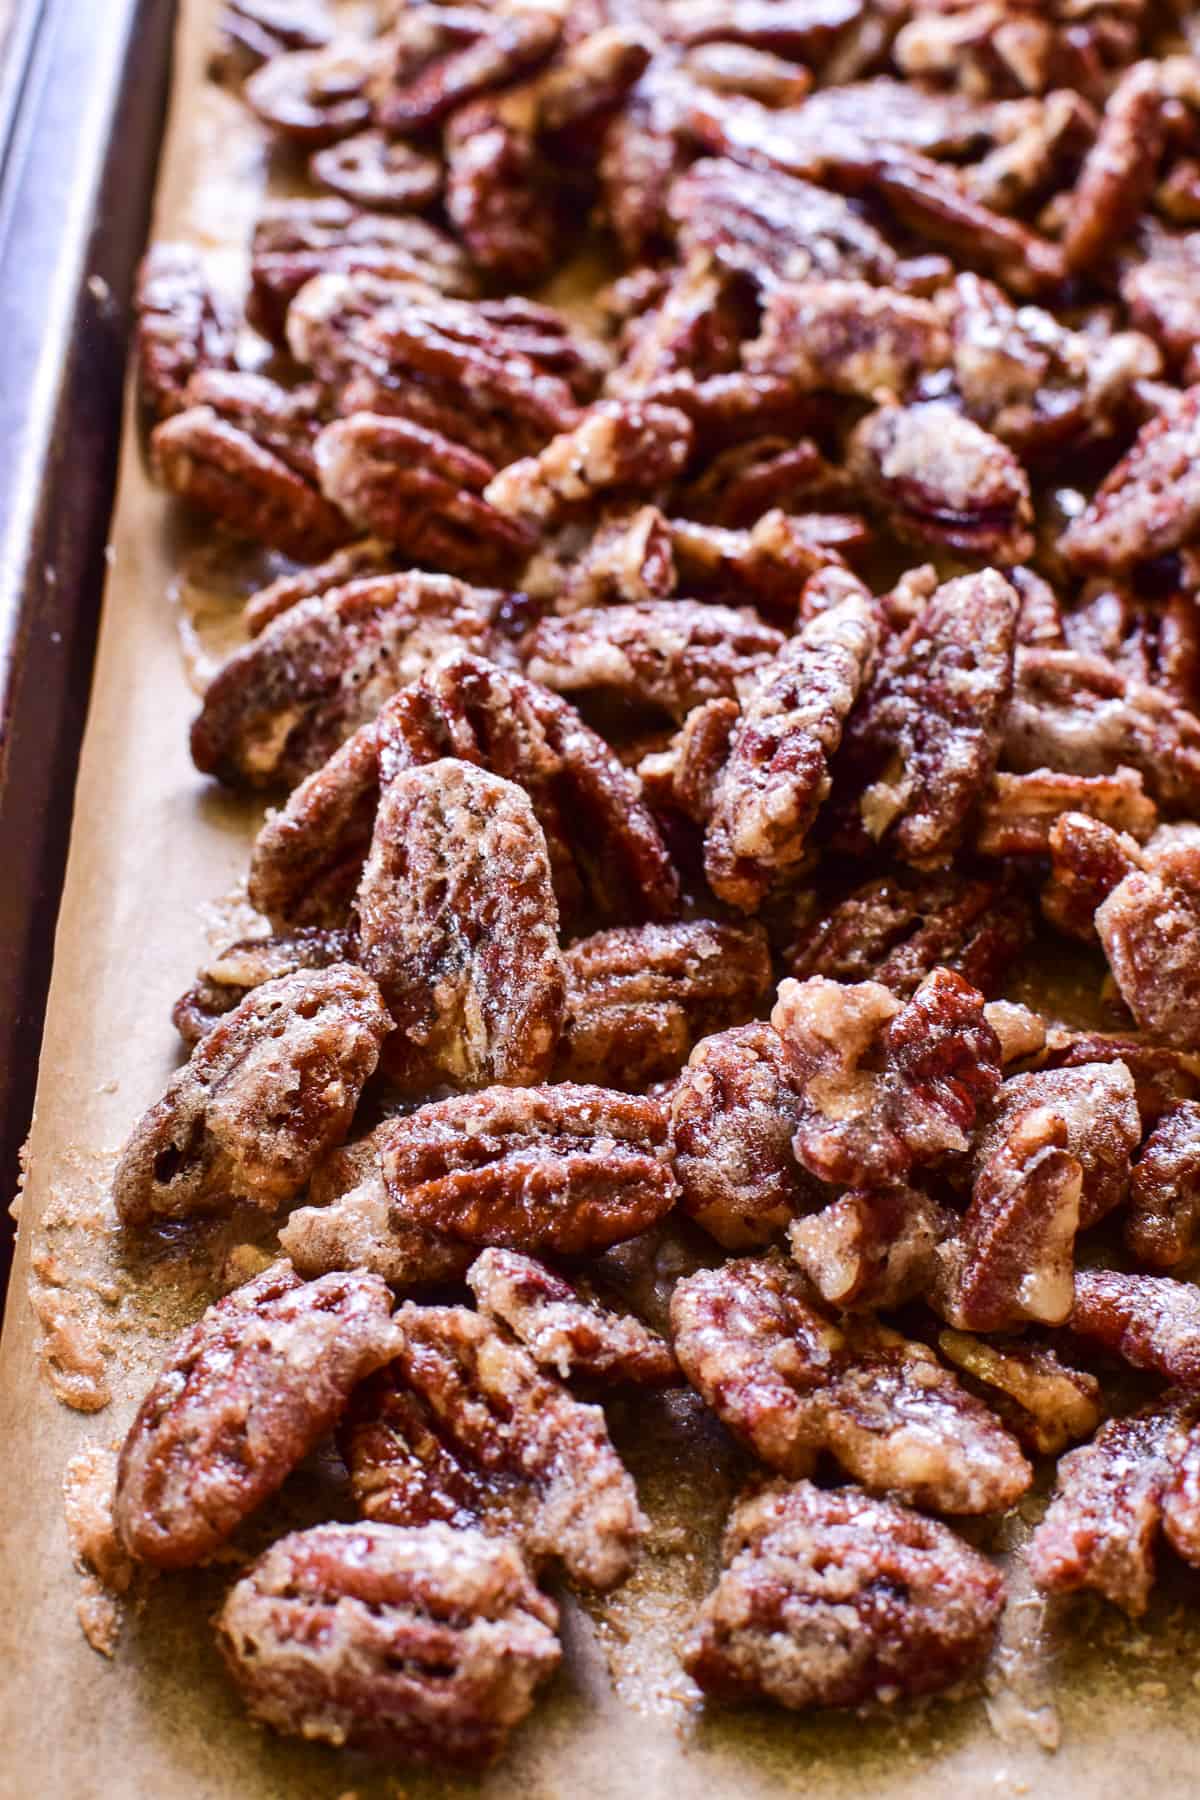 Candied Pecans in a parchment paper lined baking sheet